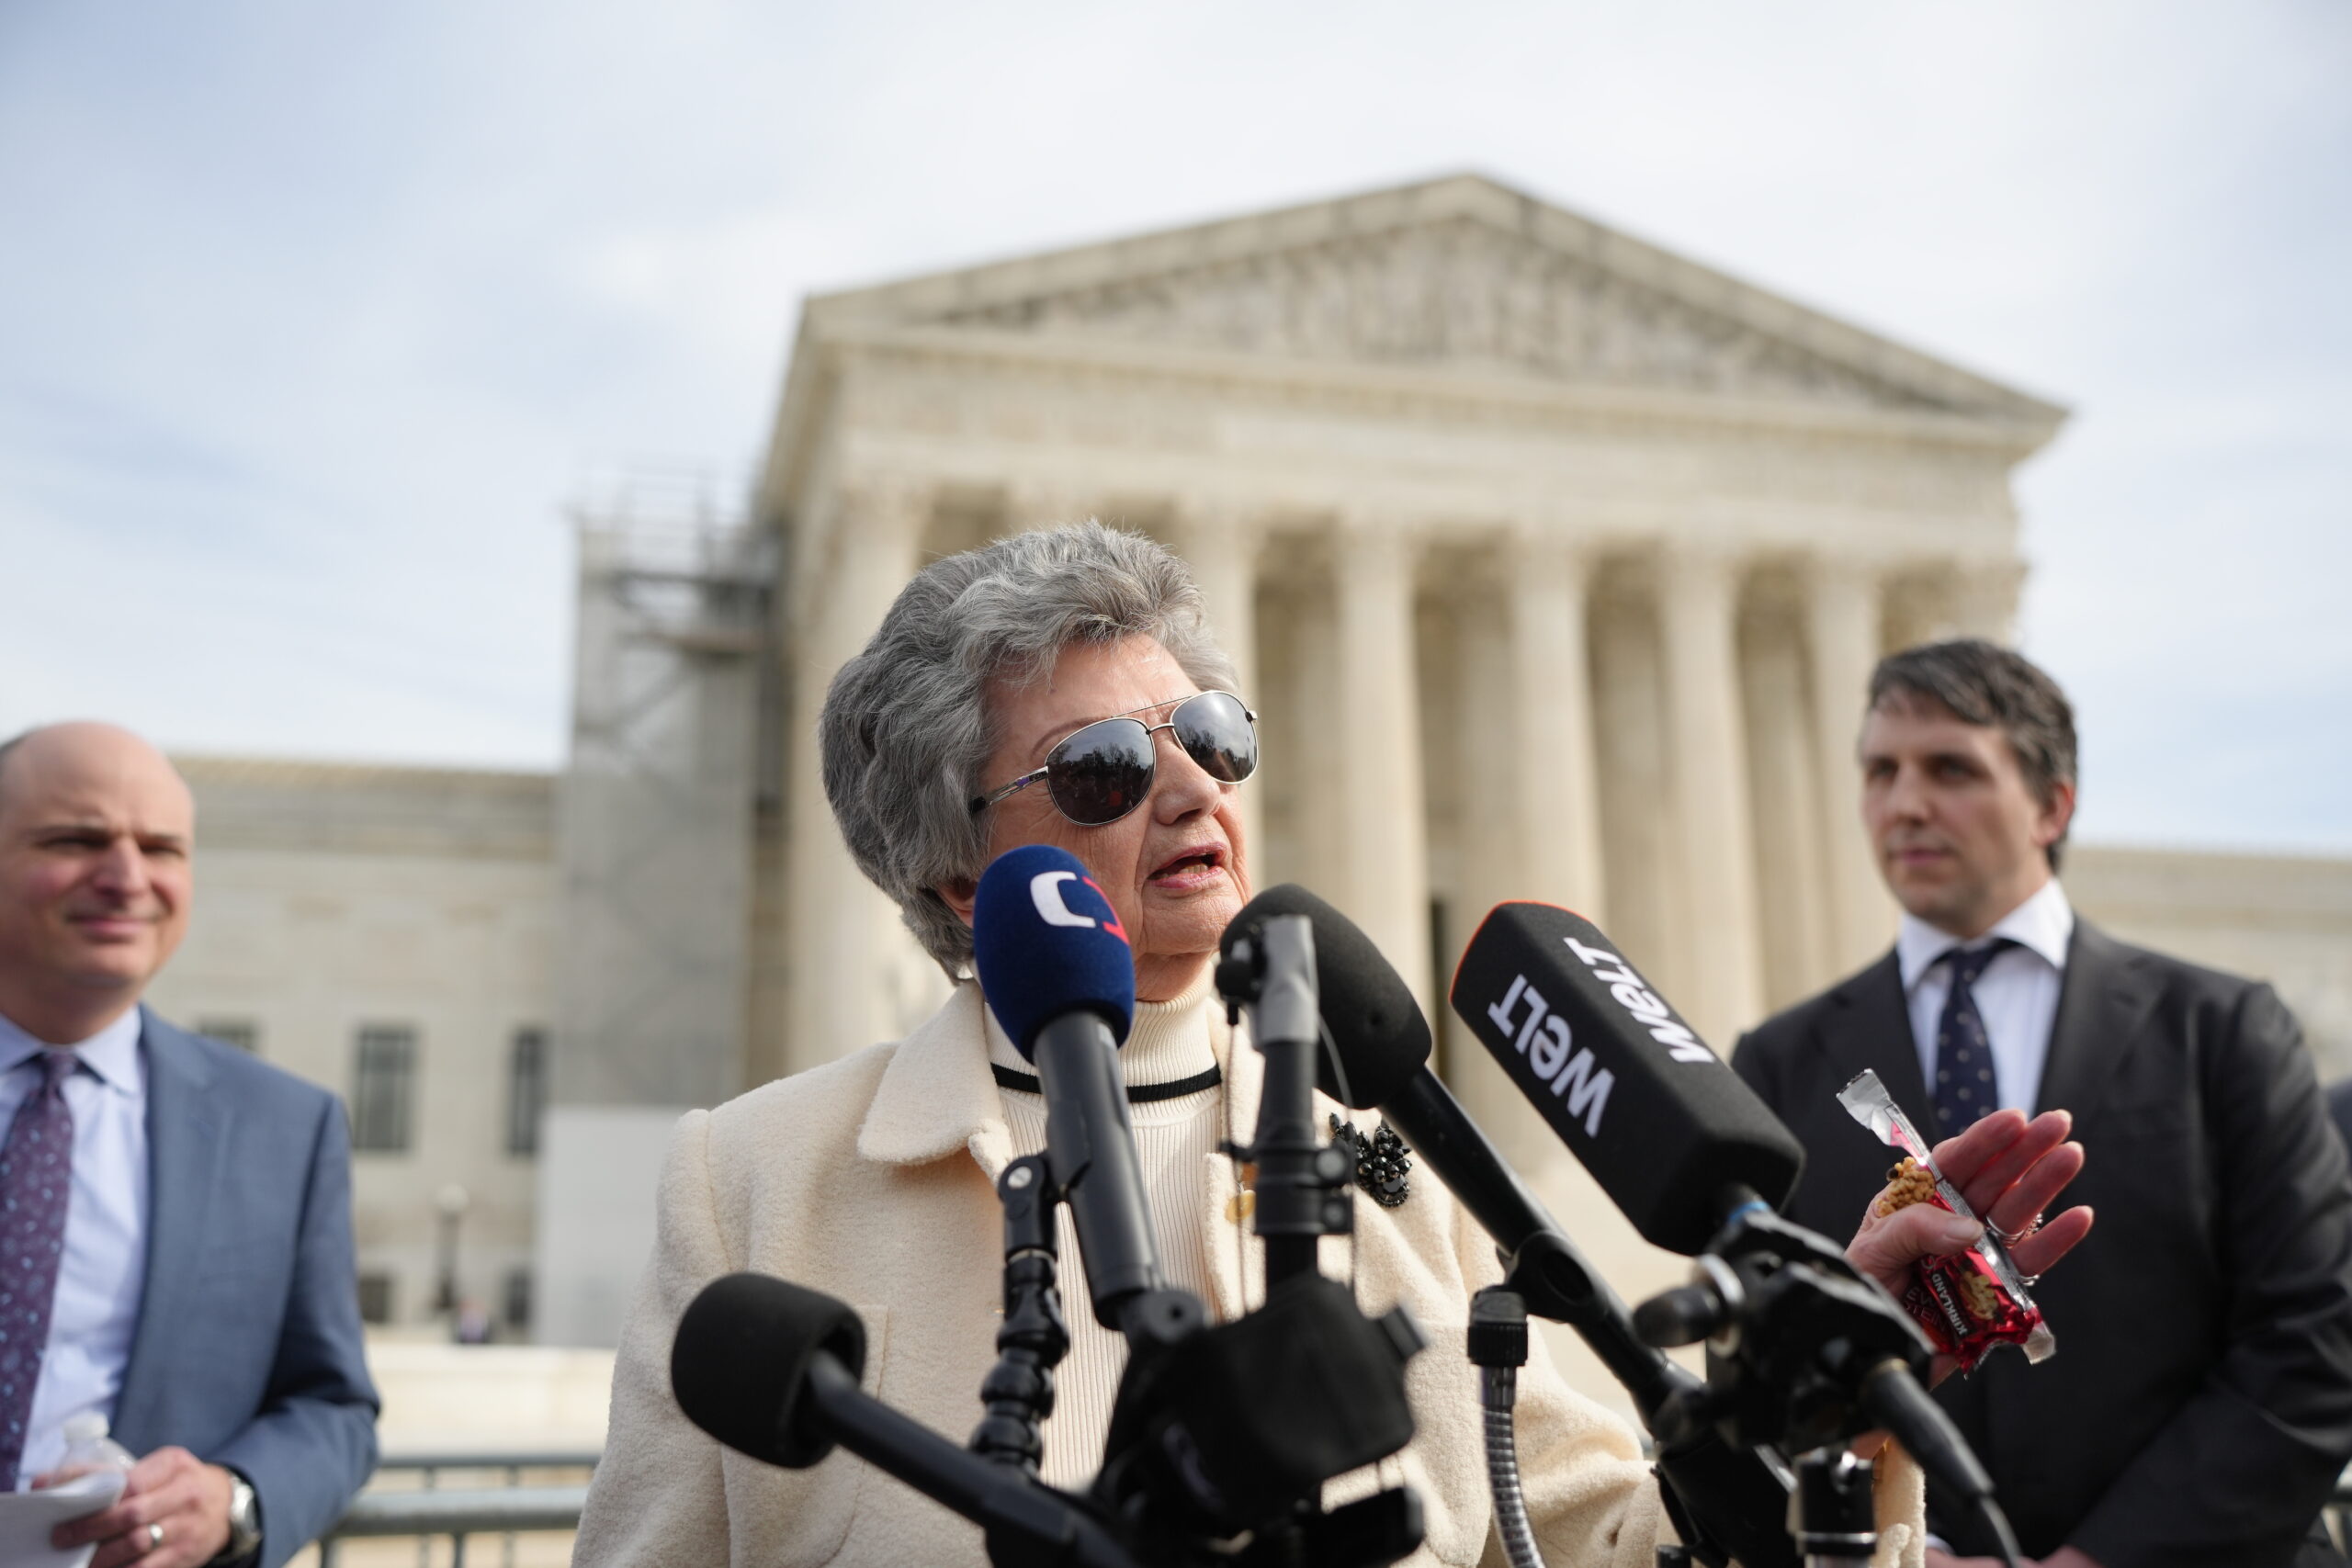 Norma Anderson speaks before the U.S. Supreme Court.